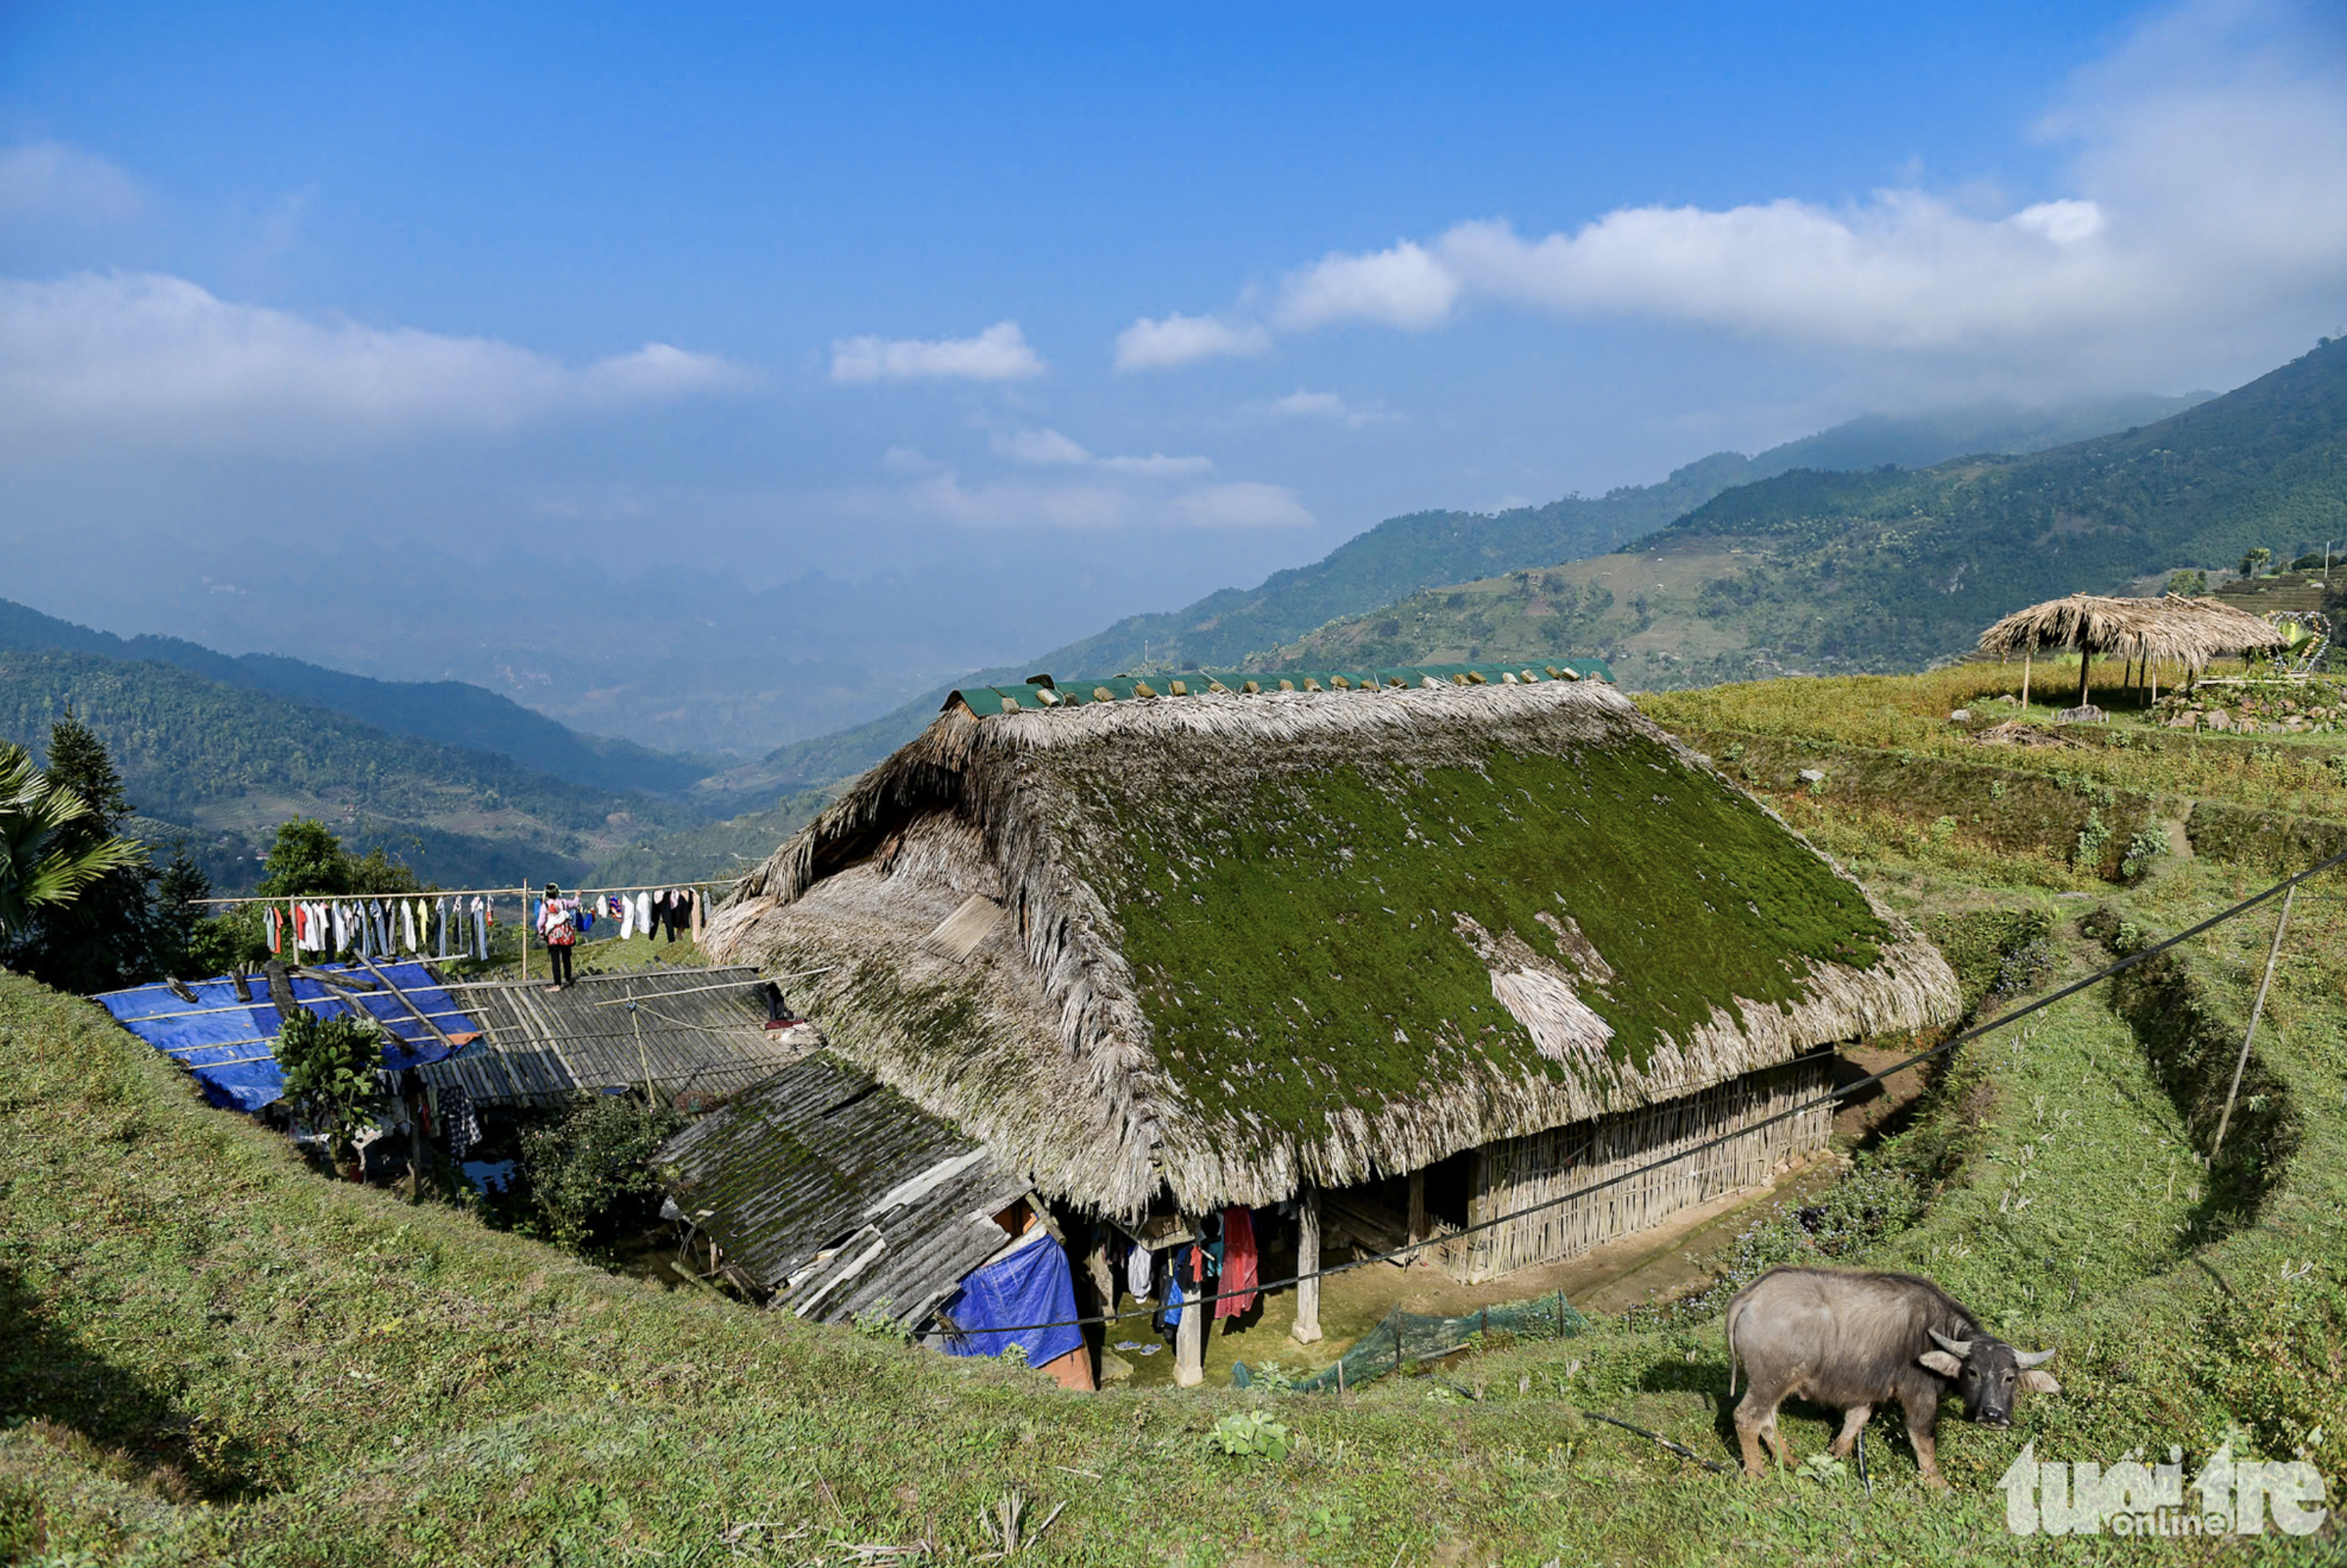 Explore uniqueness of moss-roofed stilt houses in northern Vietnam